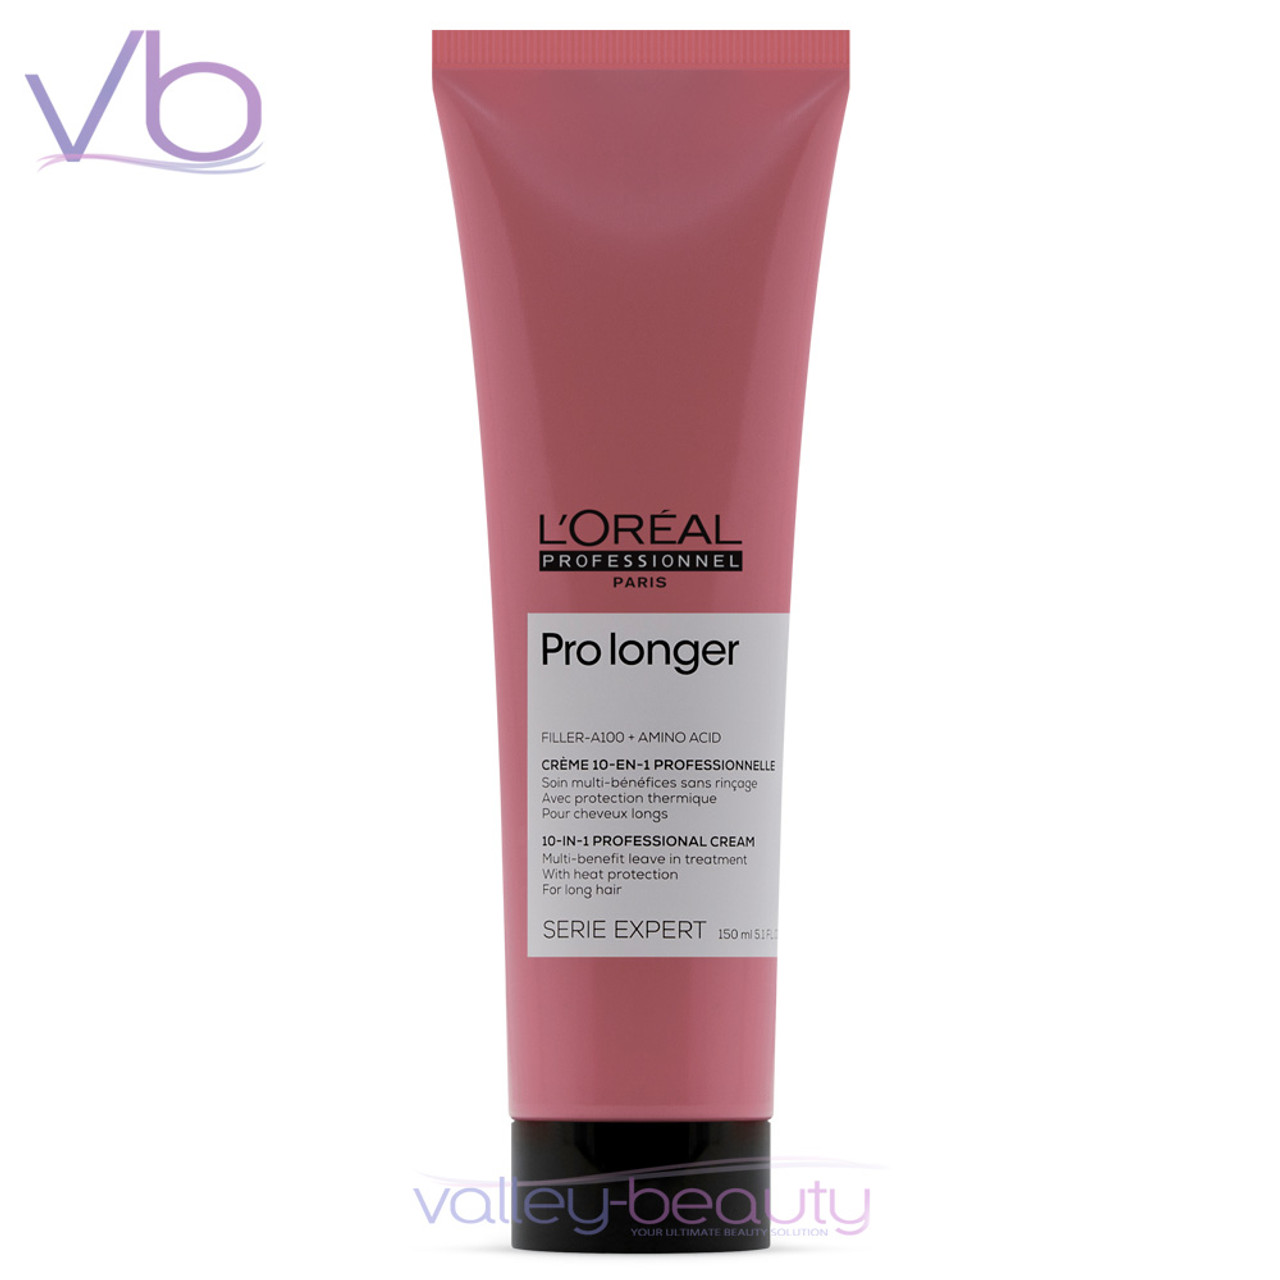 L'Oreal L’Oreal Professionnel Serie Expert Pro Longer 10-in-1 Leave-in Cream | Leave-in for Lengths and Ends, 5.1oz